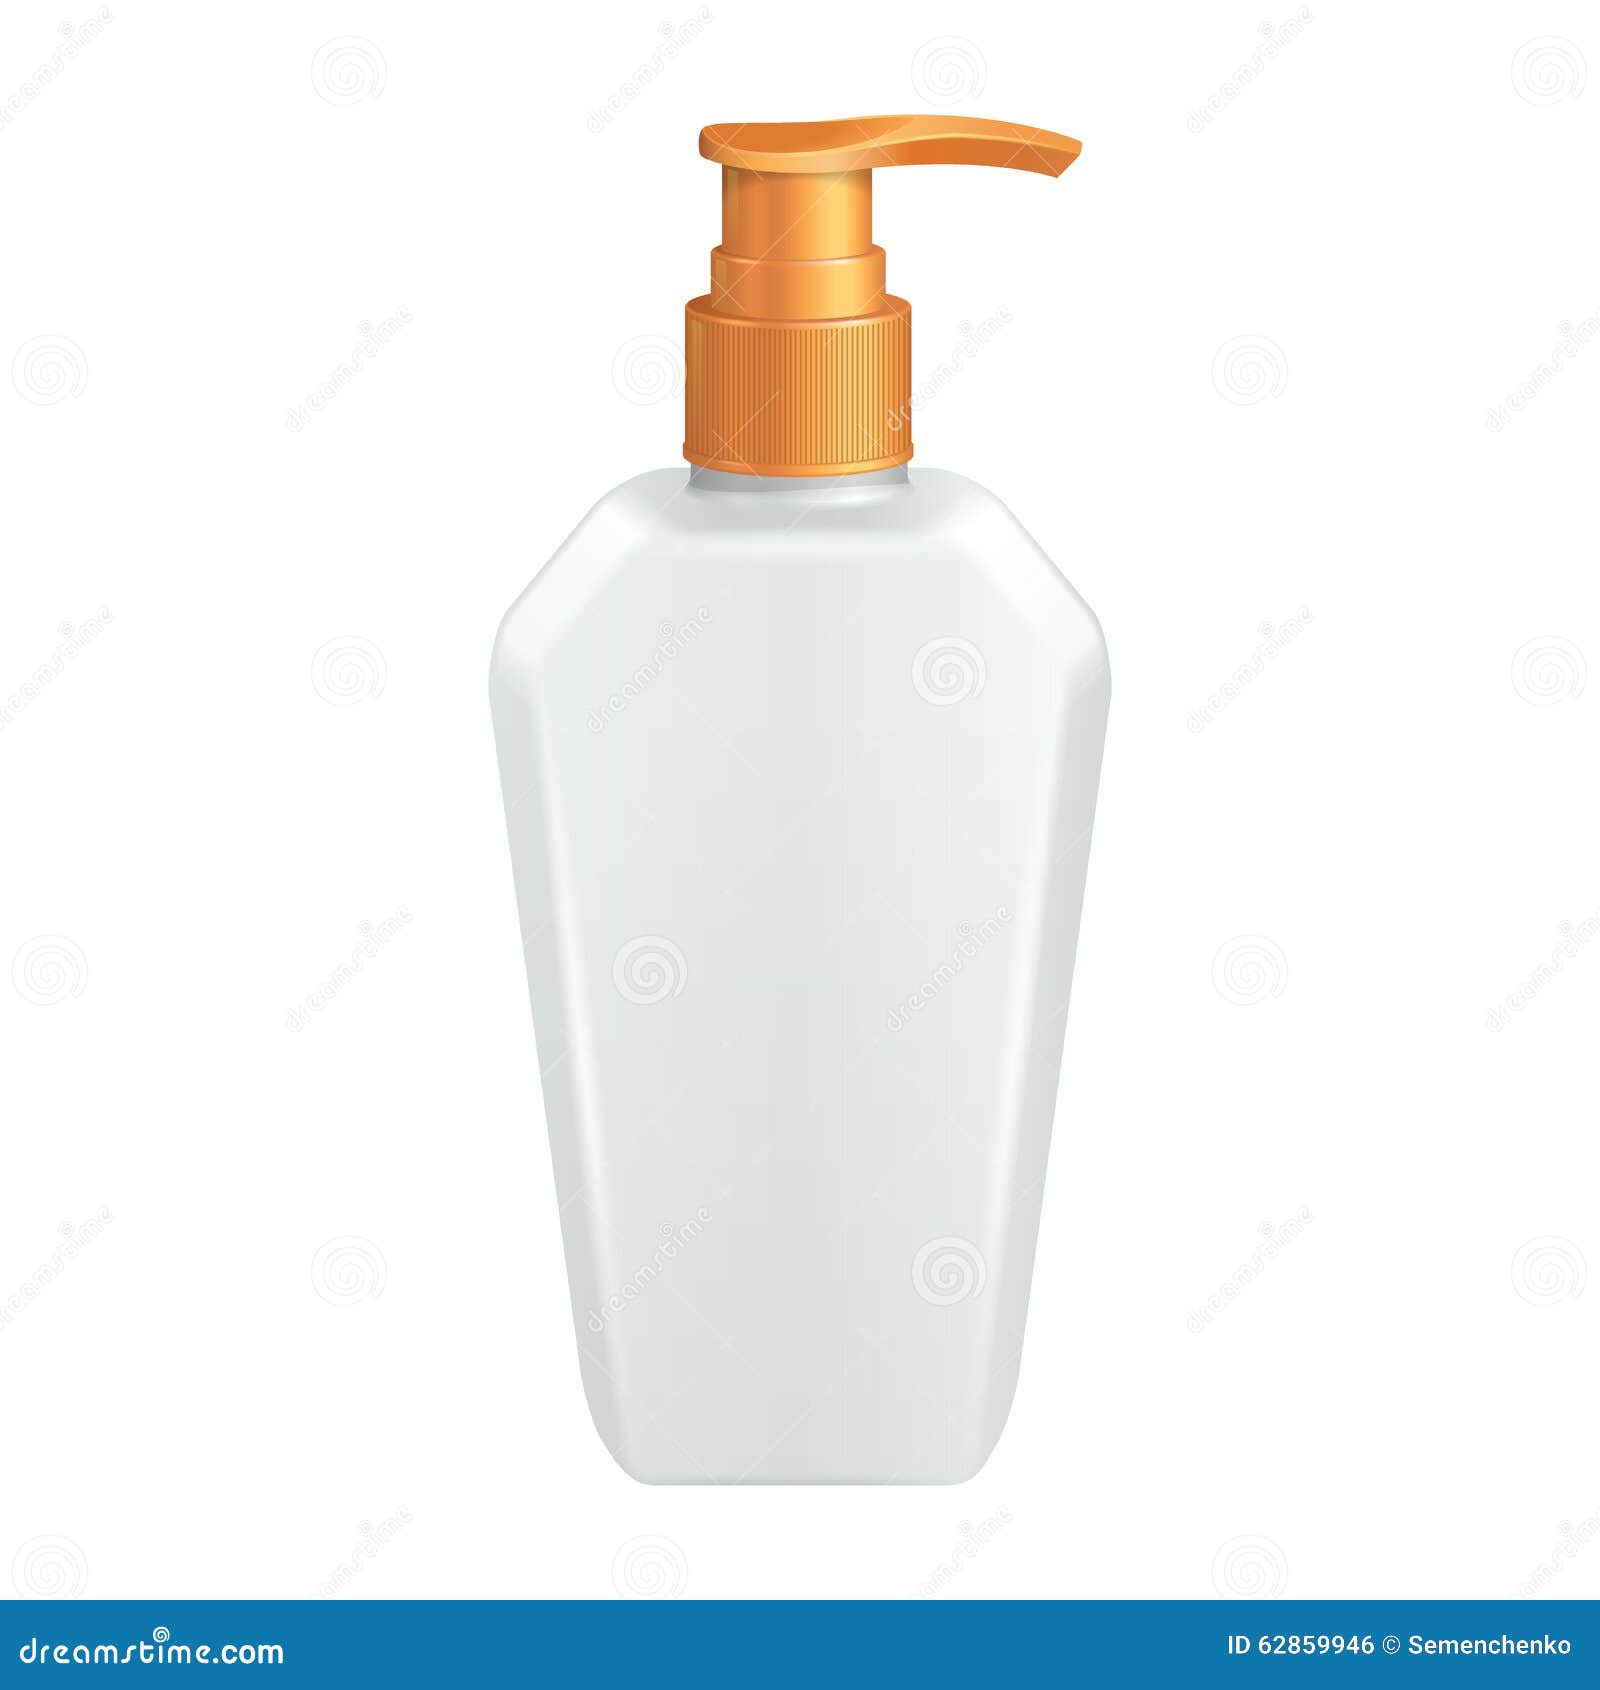 Download Plastic Clean White Bottle With Yellow Dispenser Pump Stock Illustration Illustration Of Hair Beauty 62859946 Yellowimages Mockups